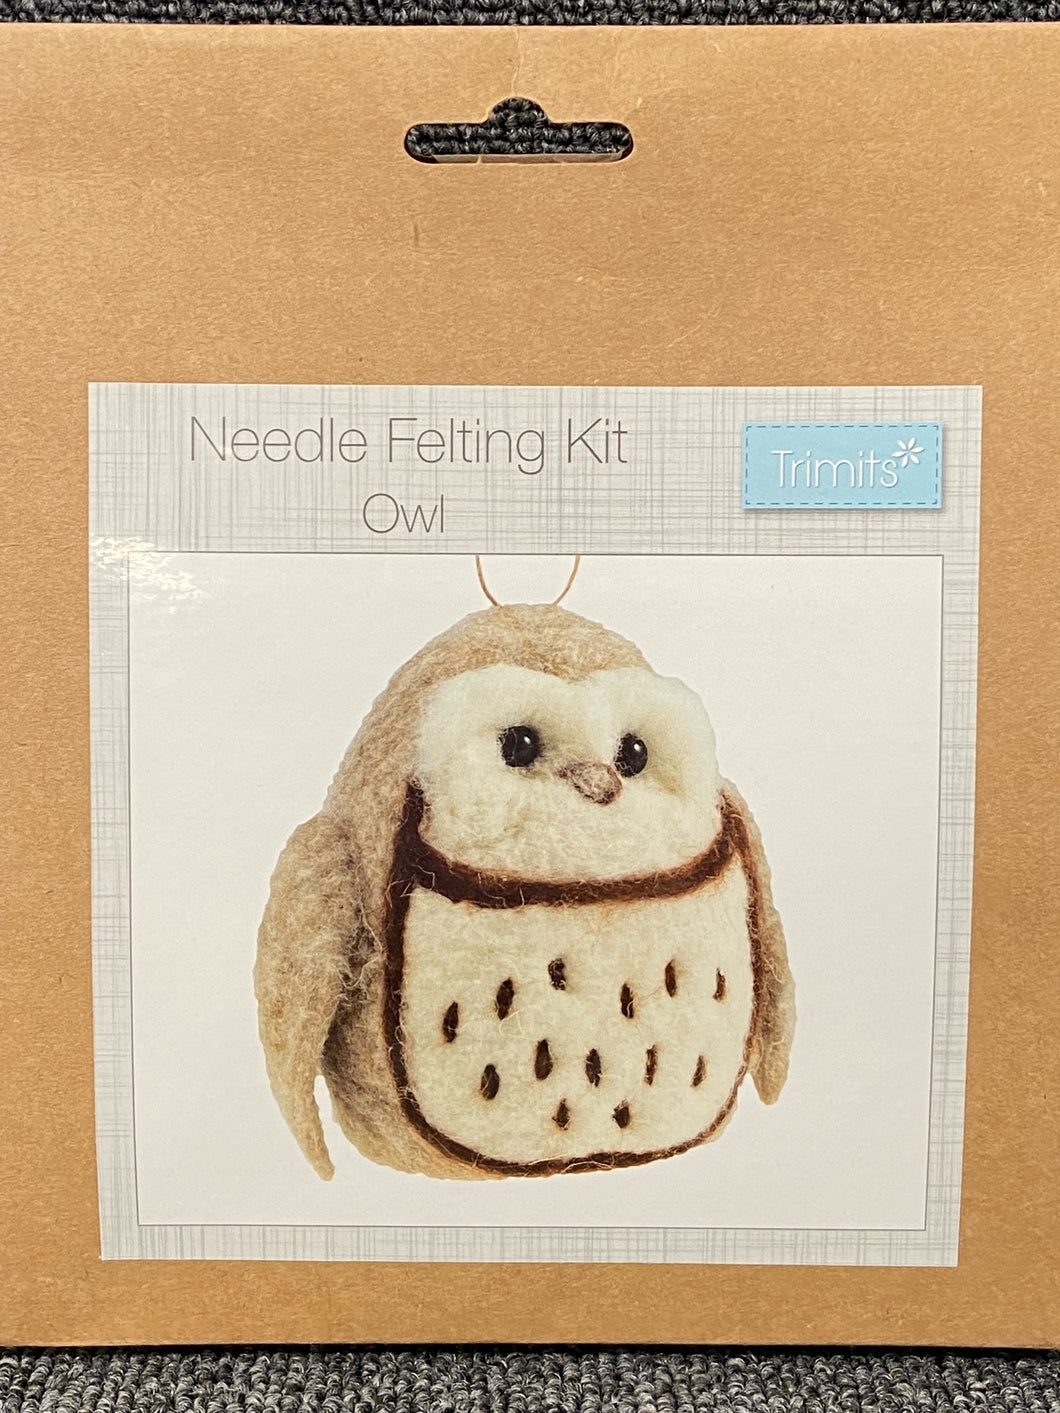 fabric shack sewing quilting sew fat quarter cotton patchwork quilt needle felting wool roving  owl kit